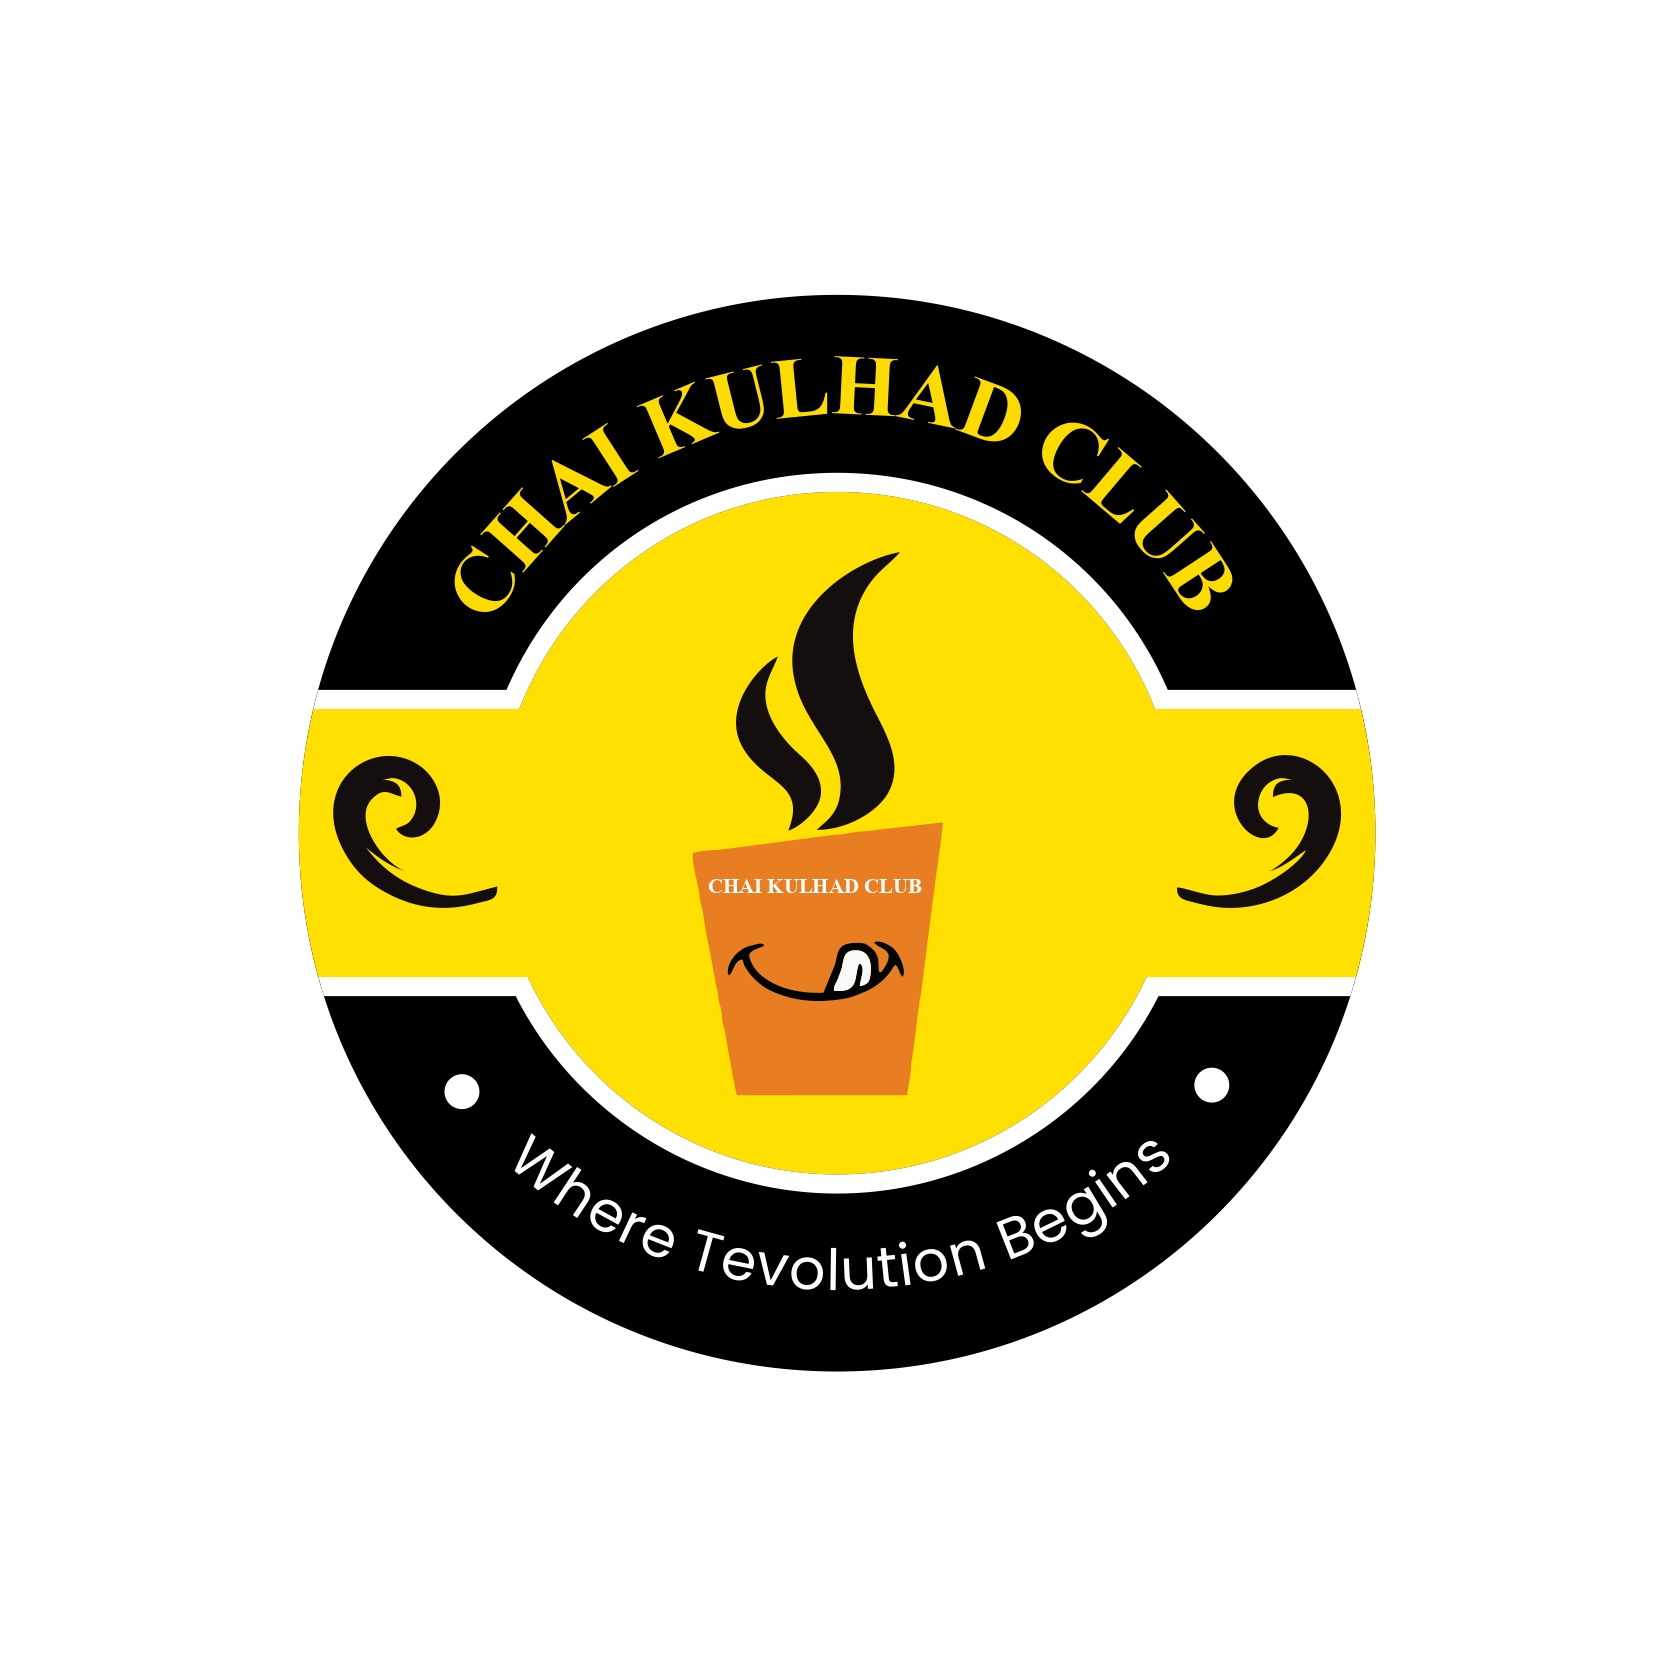 Franchise business with Chai Kulhad Club